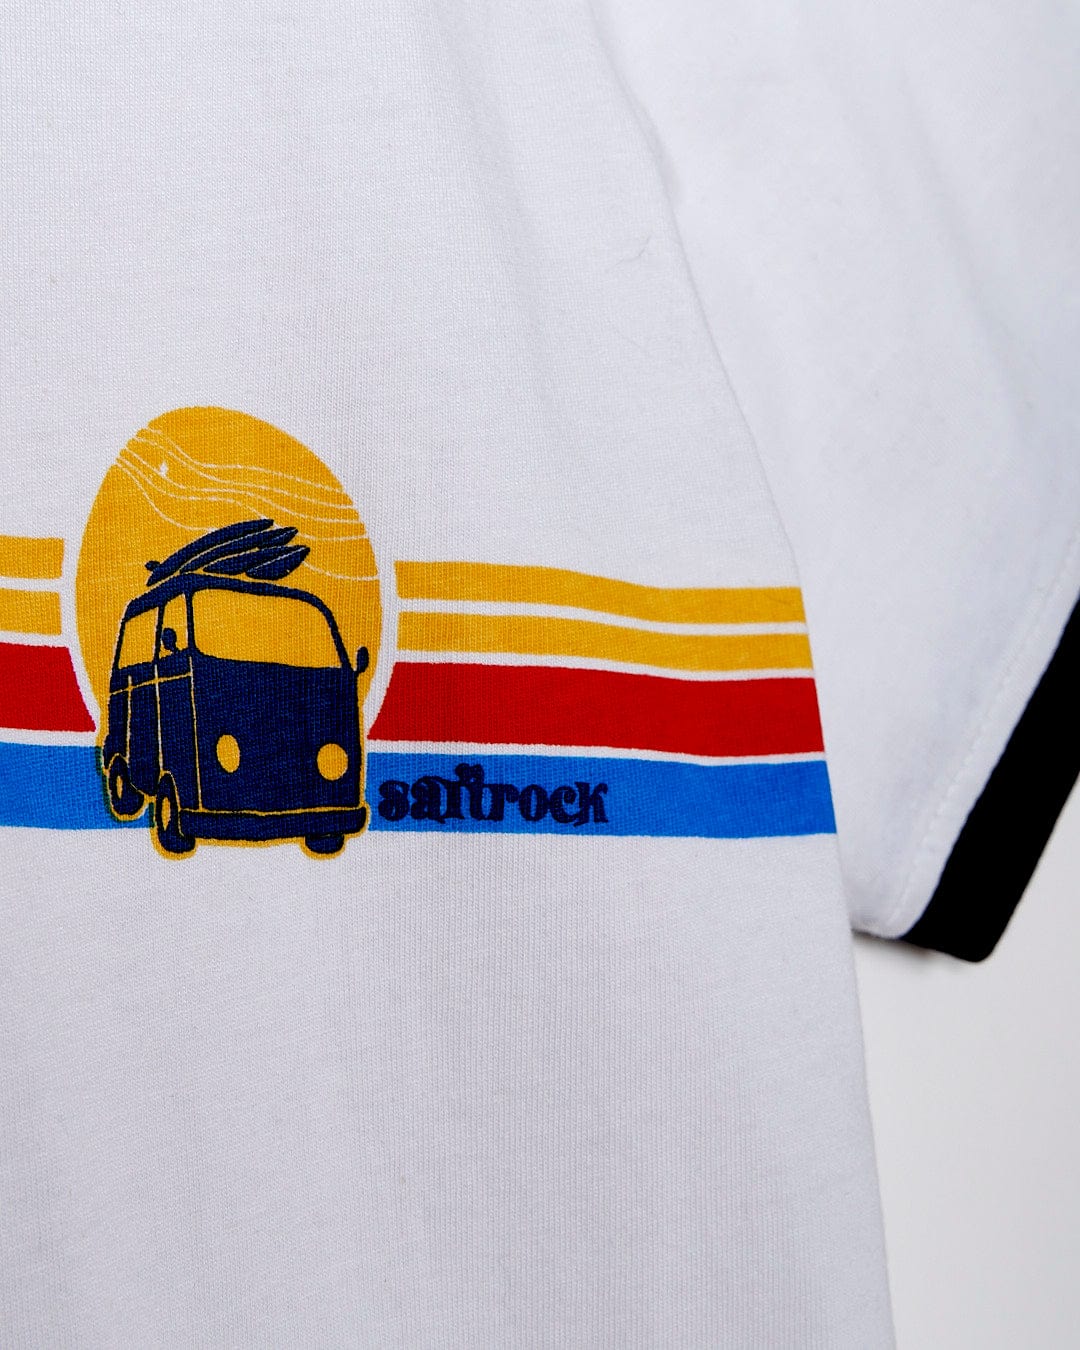 A Celeste Stripe - Womens Ringer Tee - White by Saltrock with a surf truck on it.